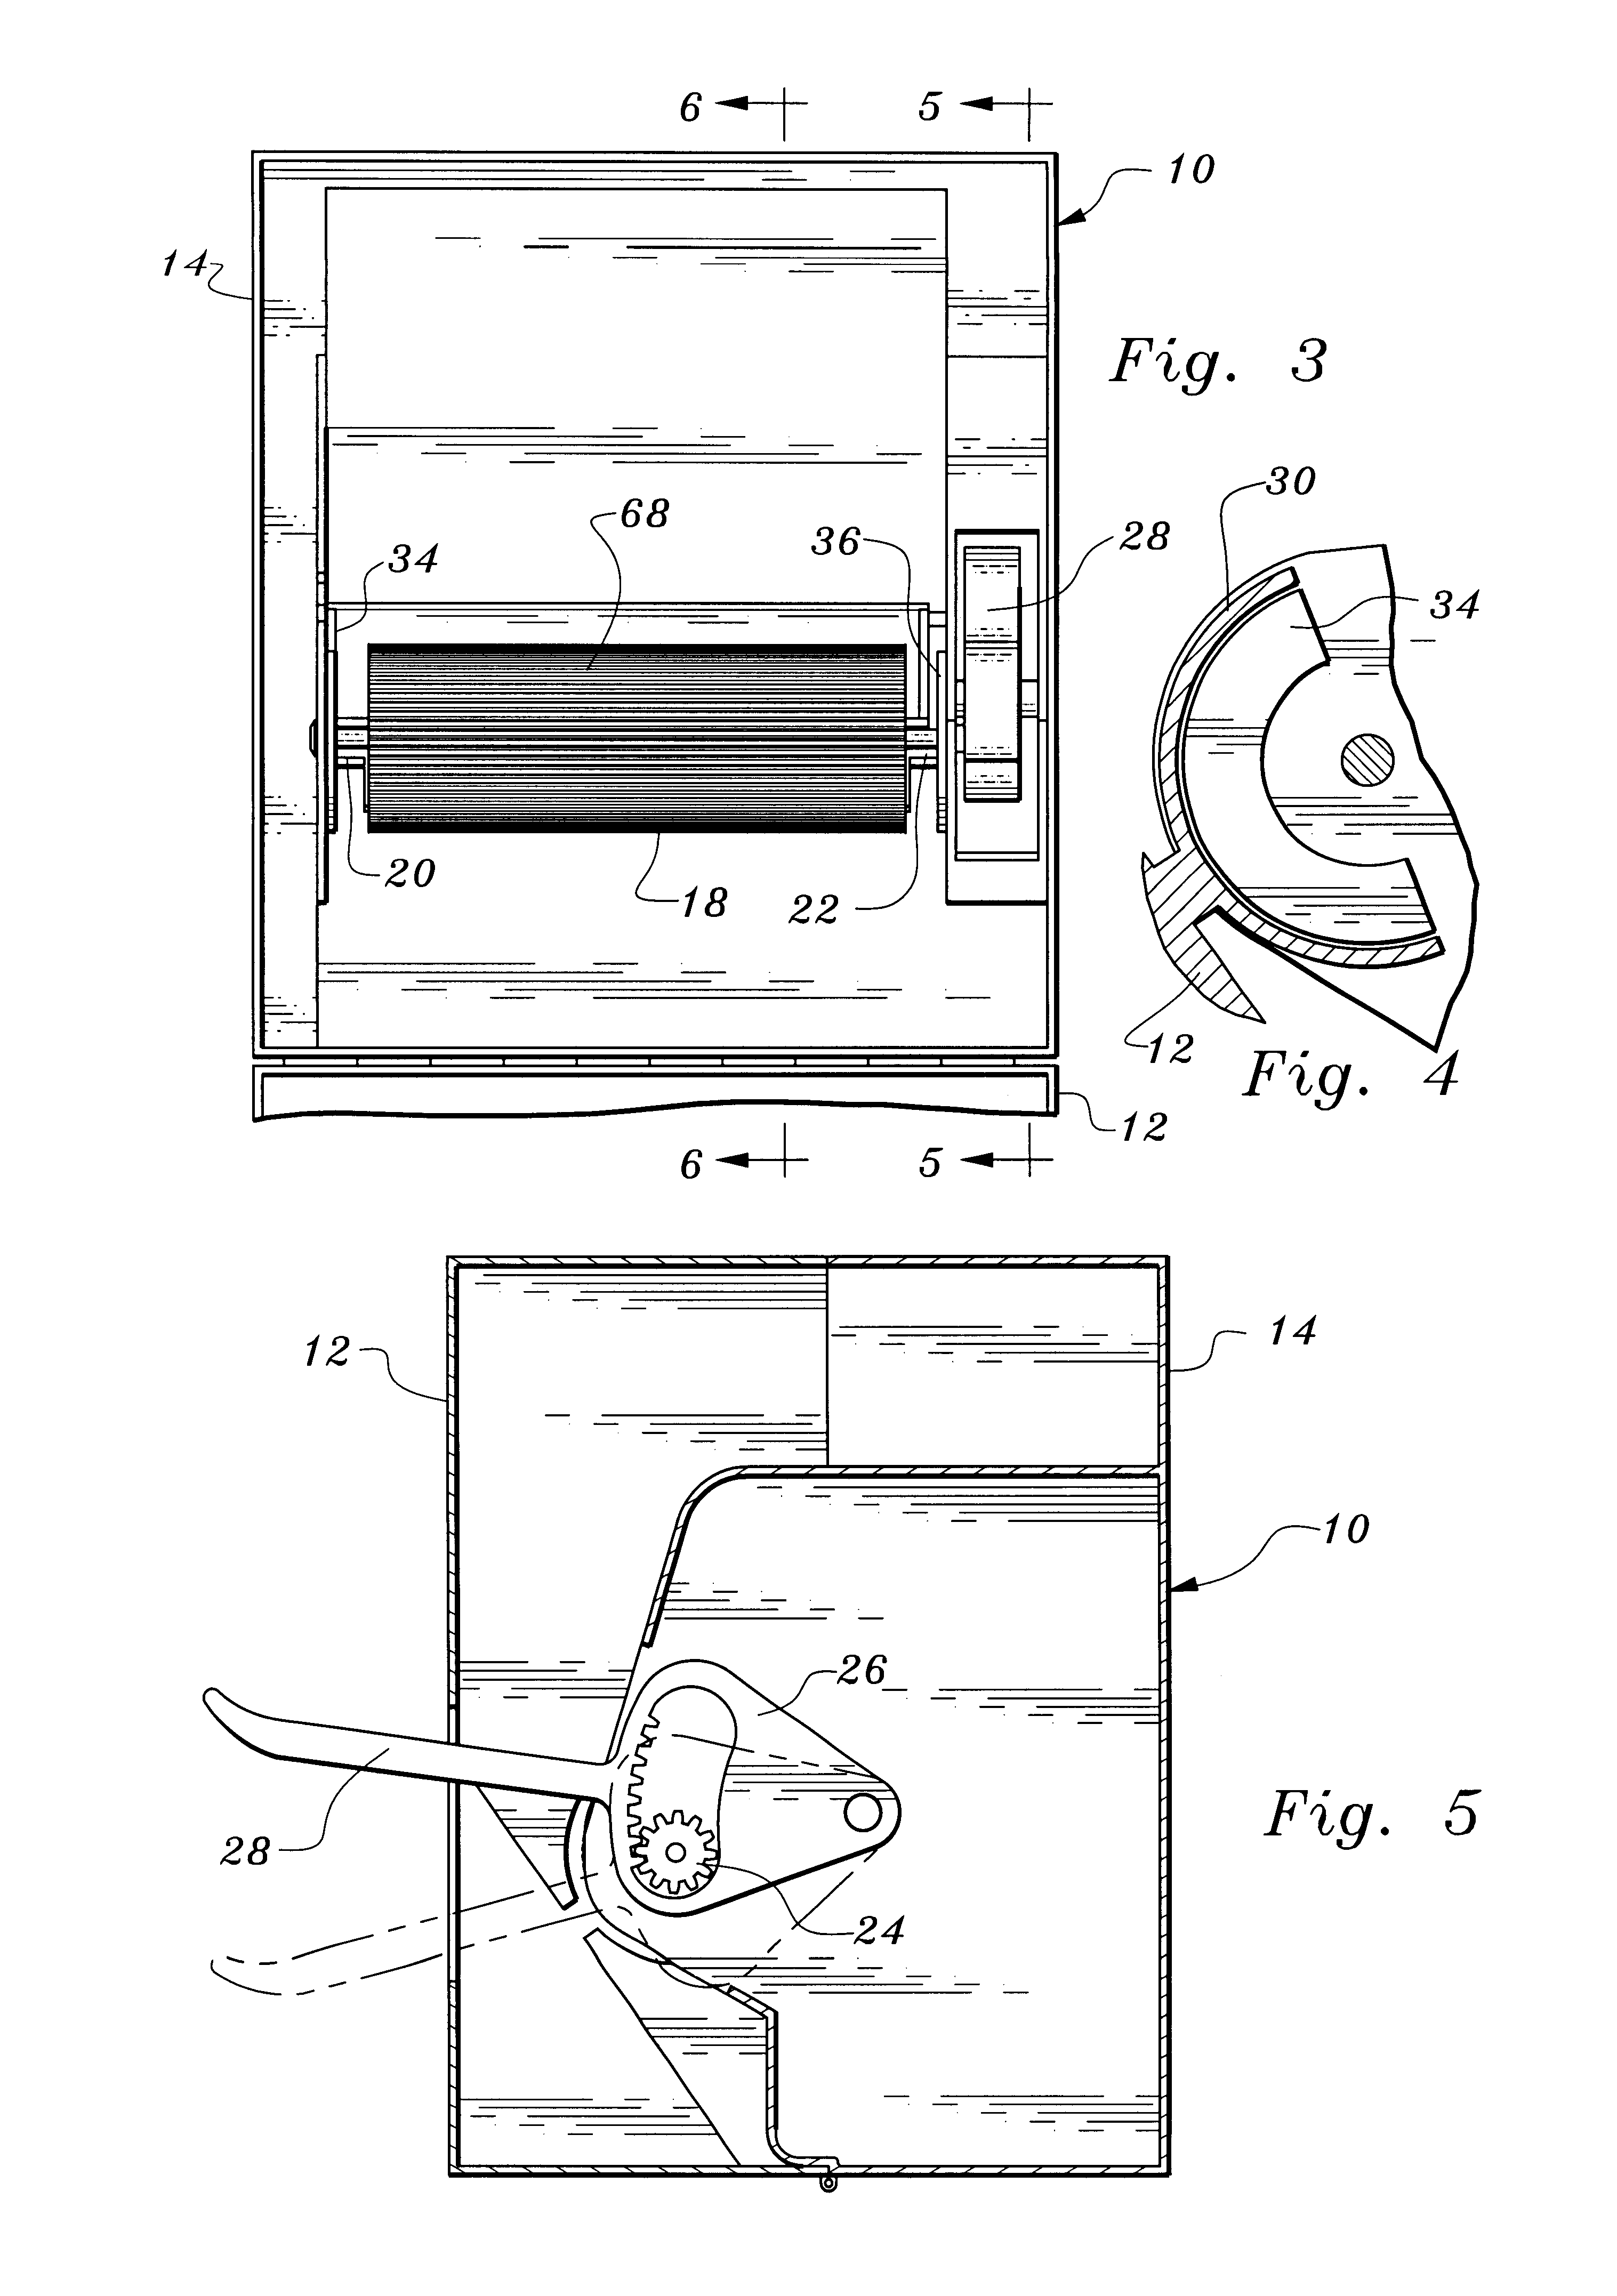 Apparatus and method for dispensing paper toweling from a roll of paper toweling